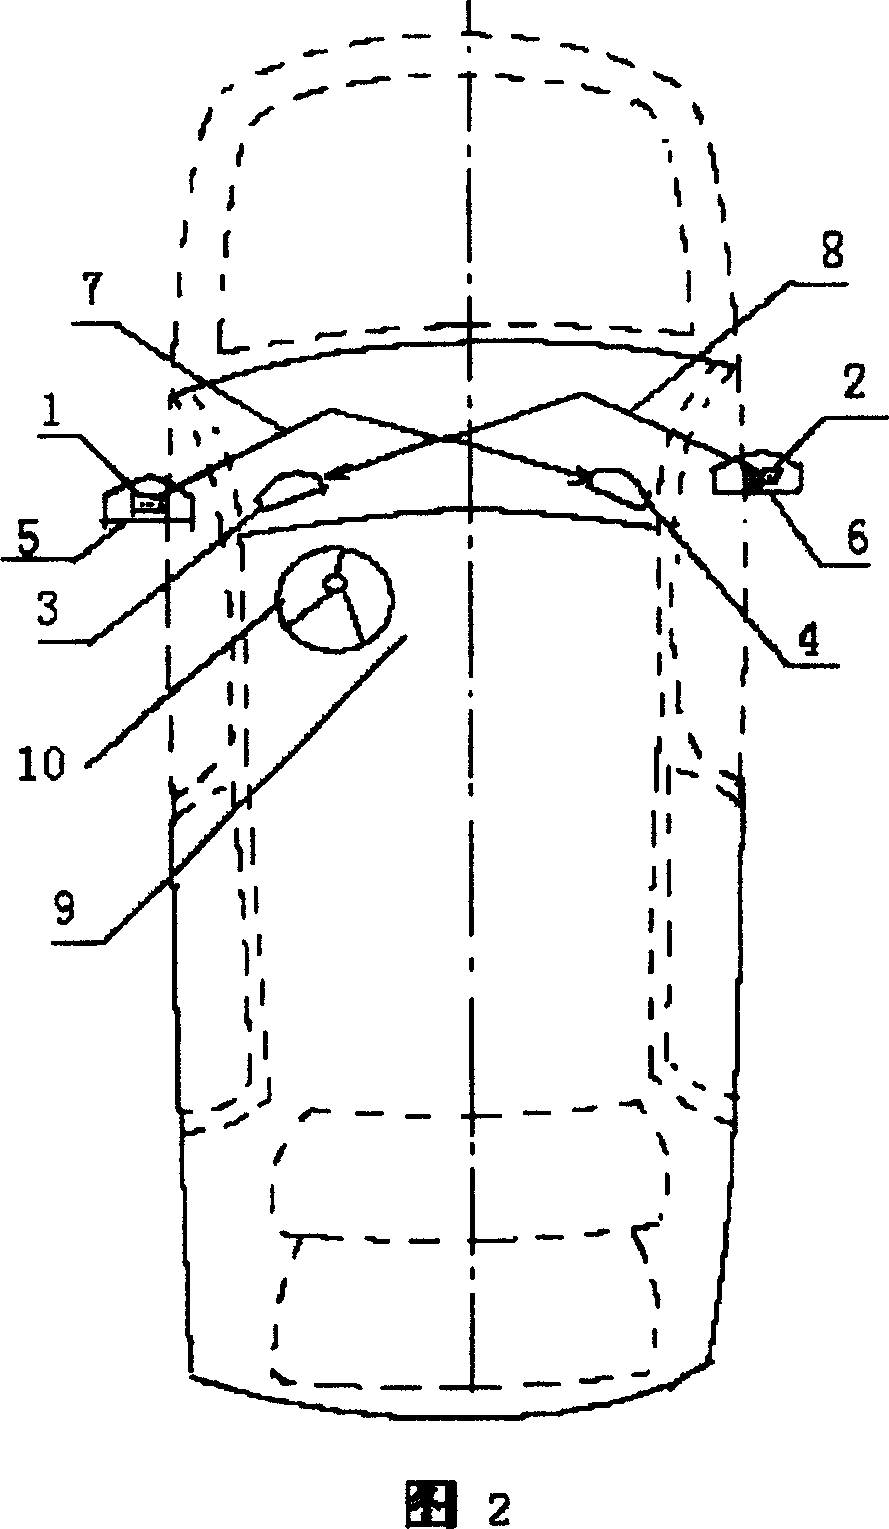 Mirrors for displaying left and right side image of motor vehicle when backing